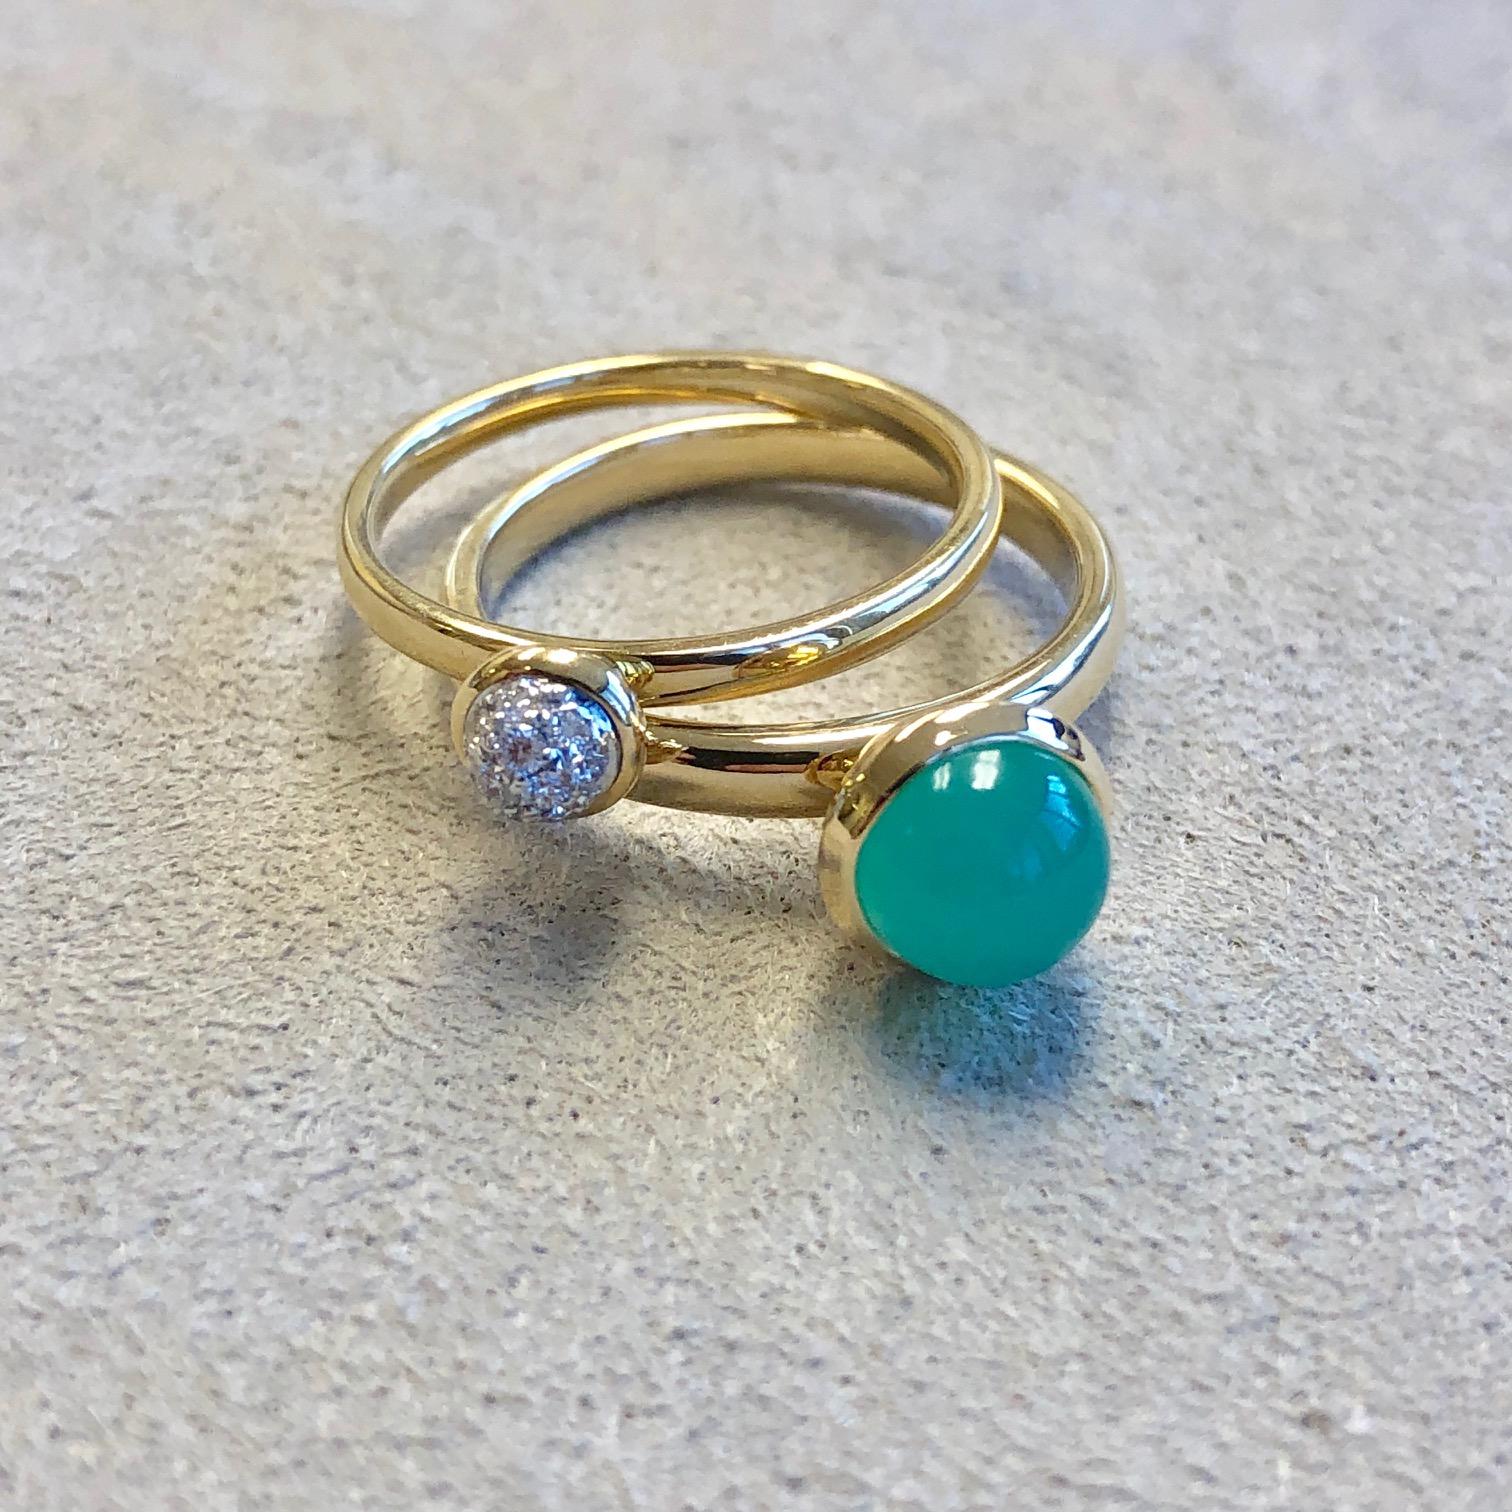 Created in 18 karat yellow gold
Chrysoprase 2 cts approx
Diamonds 0.10 cts approx
Pair of two stacking rings
Chrysoprase ring 7mm diameter approx
Diamond pave ring 5 mm diameter approx
Ring size US 6.5, can be sized upon request

Fashioned in 18